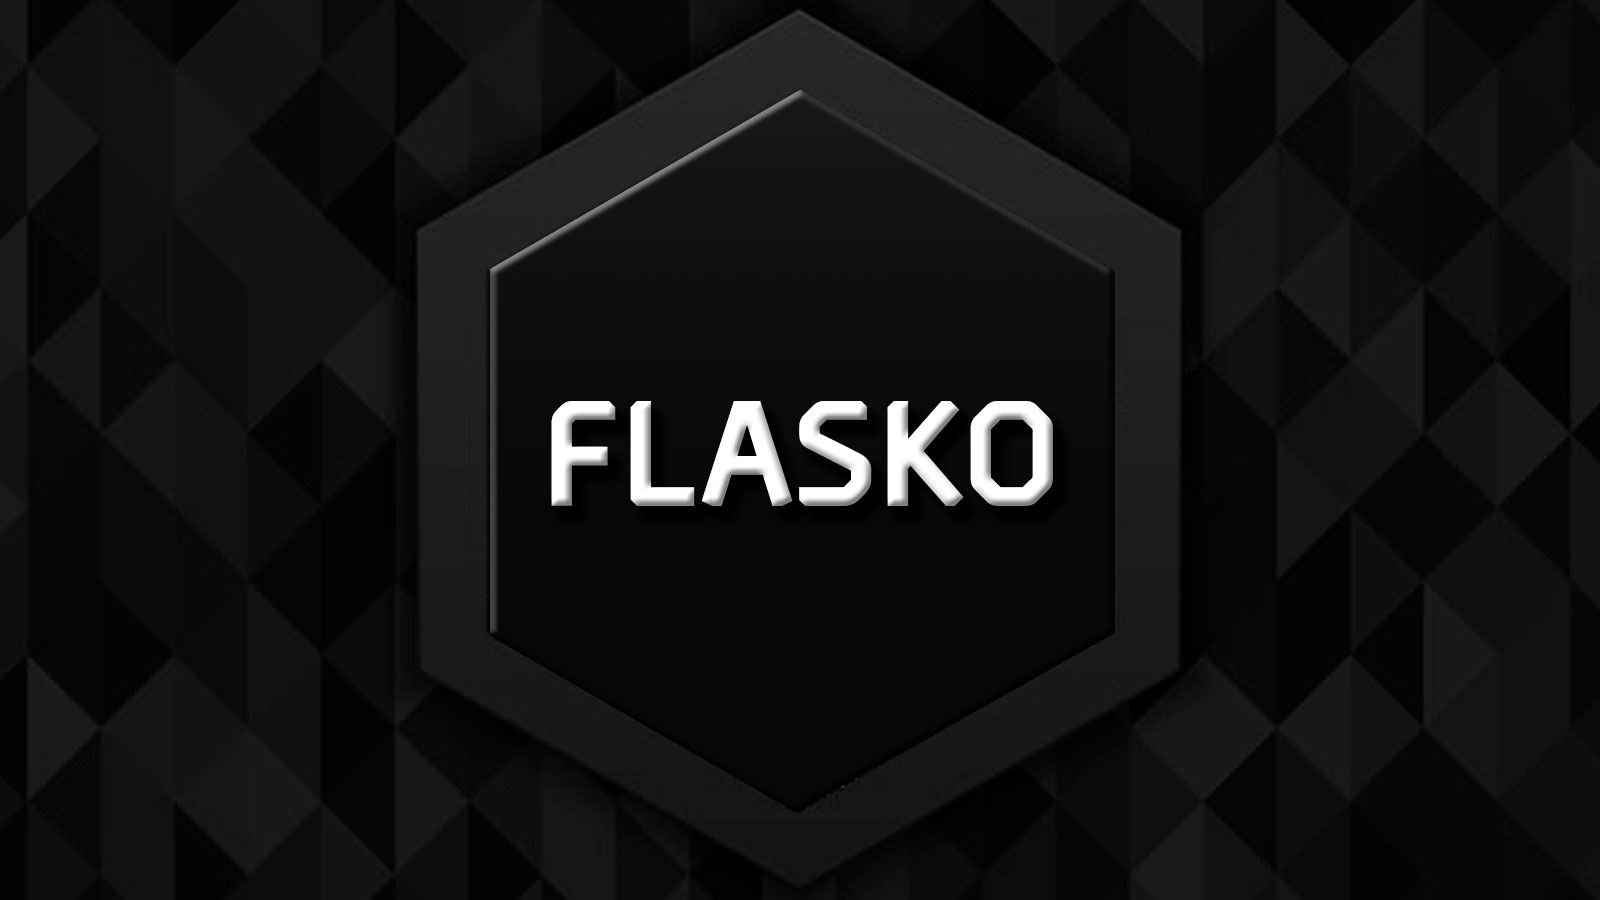 Flasko (FLSK) New Crypto Gaining Steam, While Top Coins Including Cardano (ADA) Ready for Big Moves